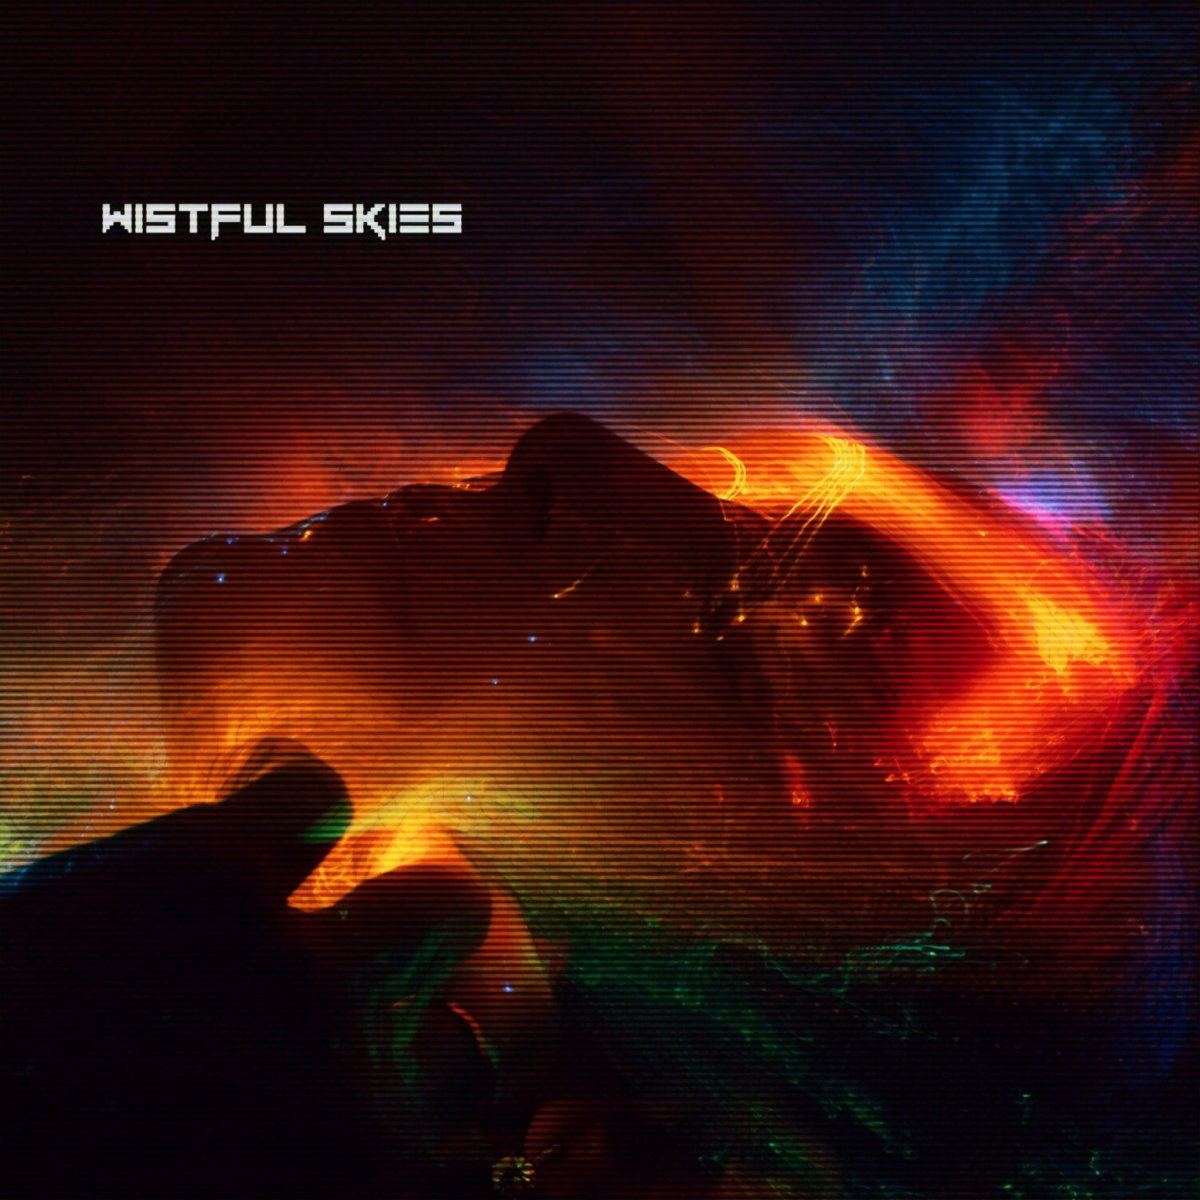 synth-single-review-wistful-skies-by-saros-fm